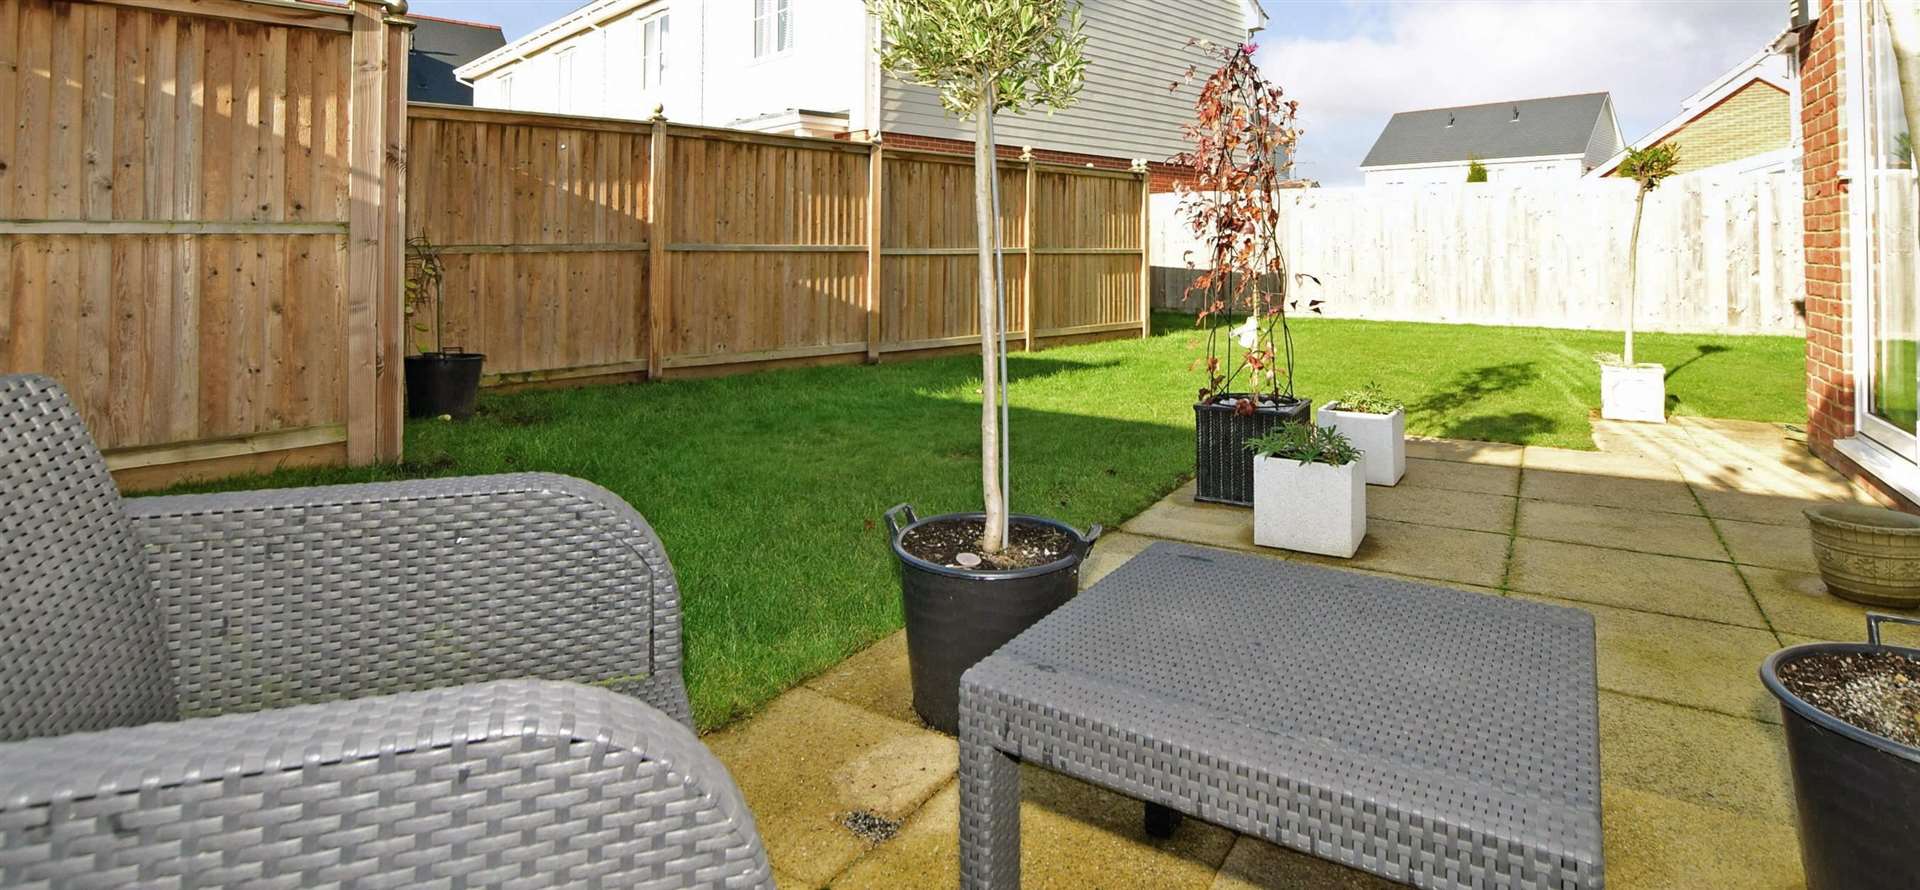 Back garden has a patio and a level lawn